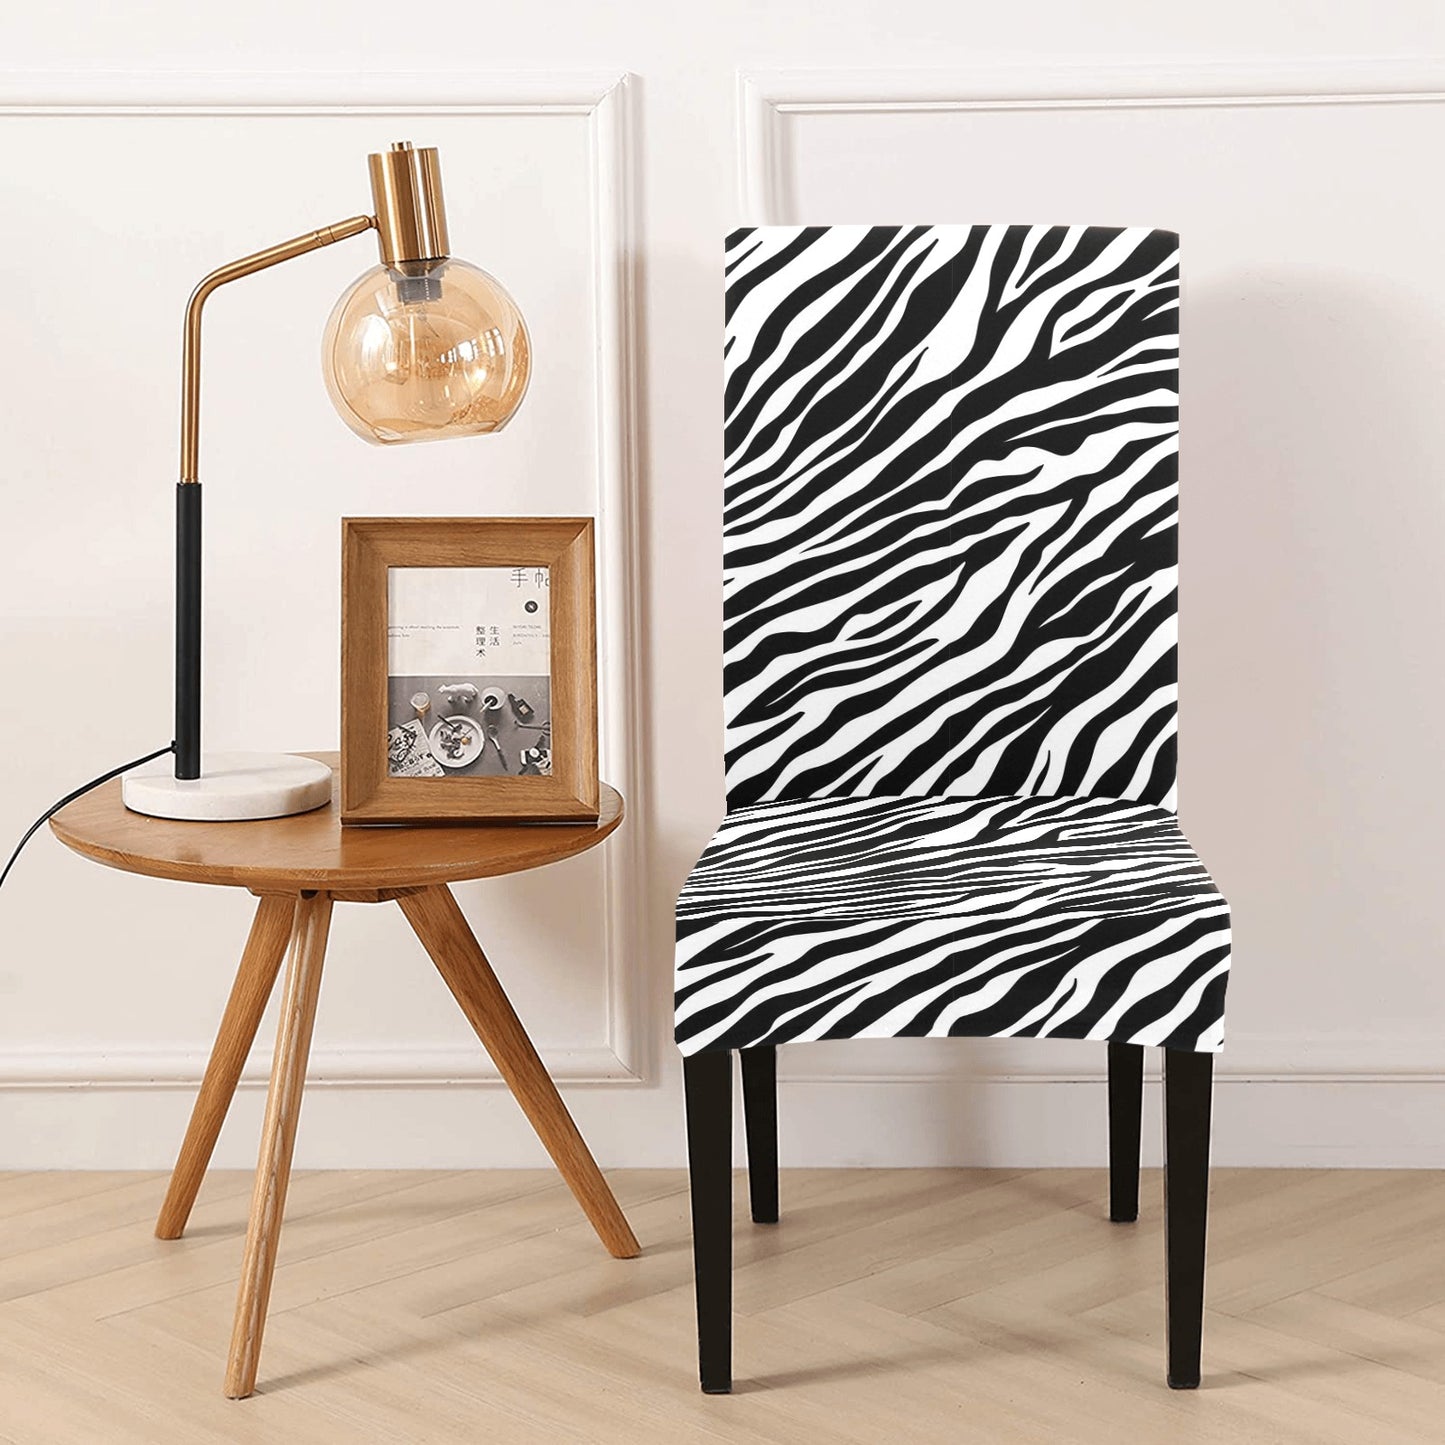 Zebra Dining Chair Seat Covers, Black White Animal Print Stretch Slipcover Furniture Dining Room Home Decor Starcove Fashion